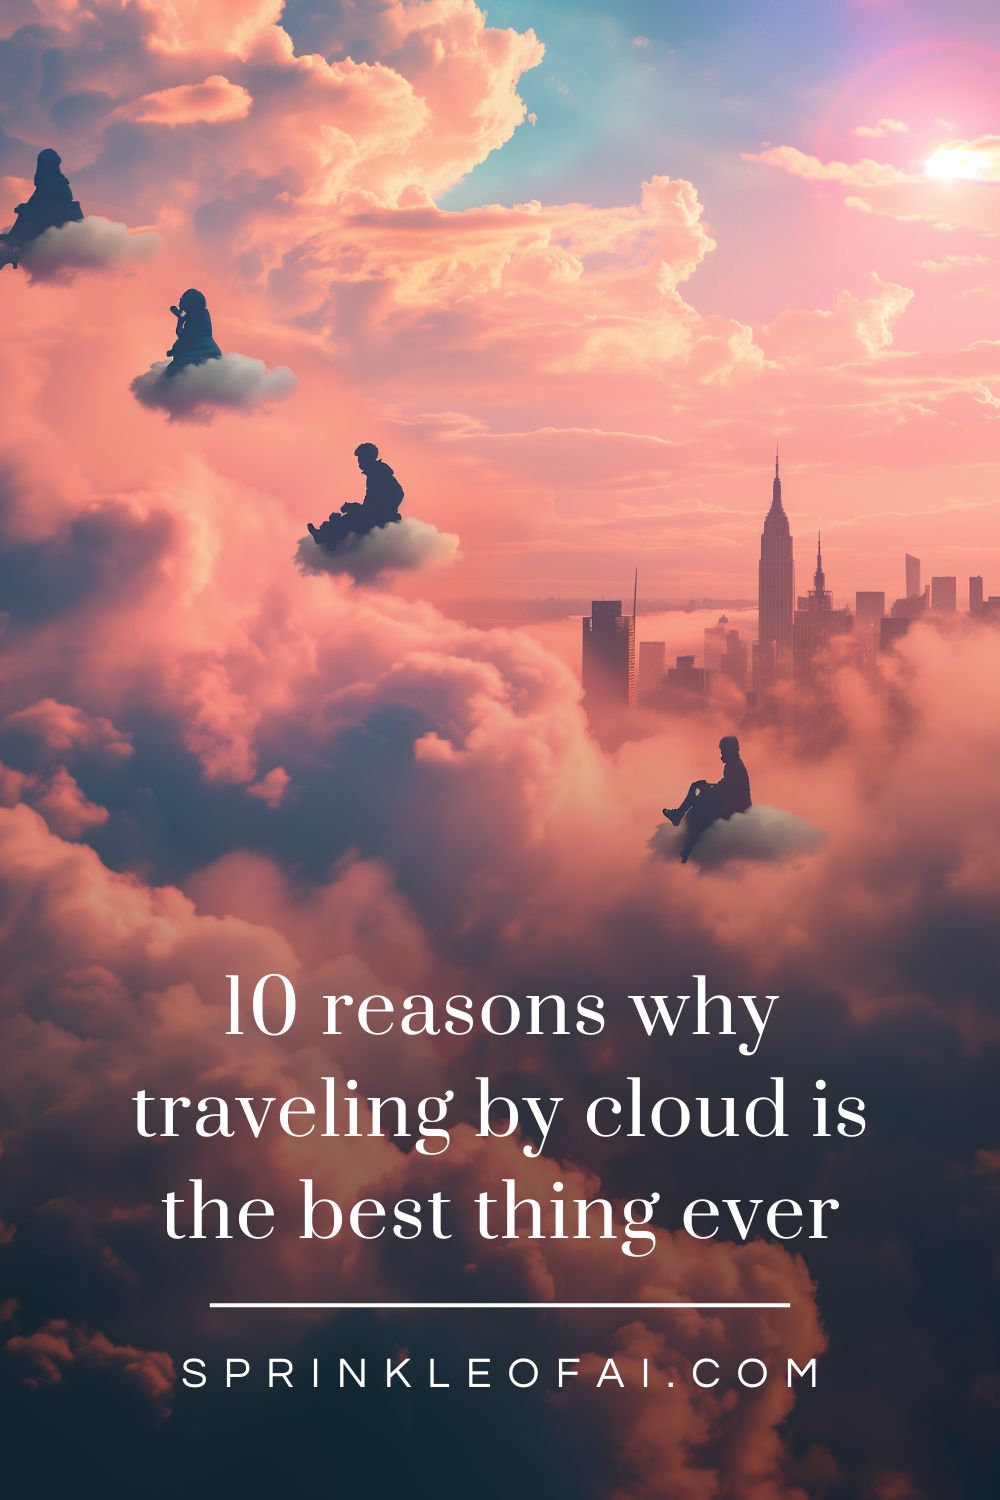 10 Reasons Why Traveling By Cloud Is The Best Thing Ever - Sprinkle of AI - AI ART BLOG 